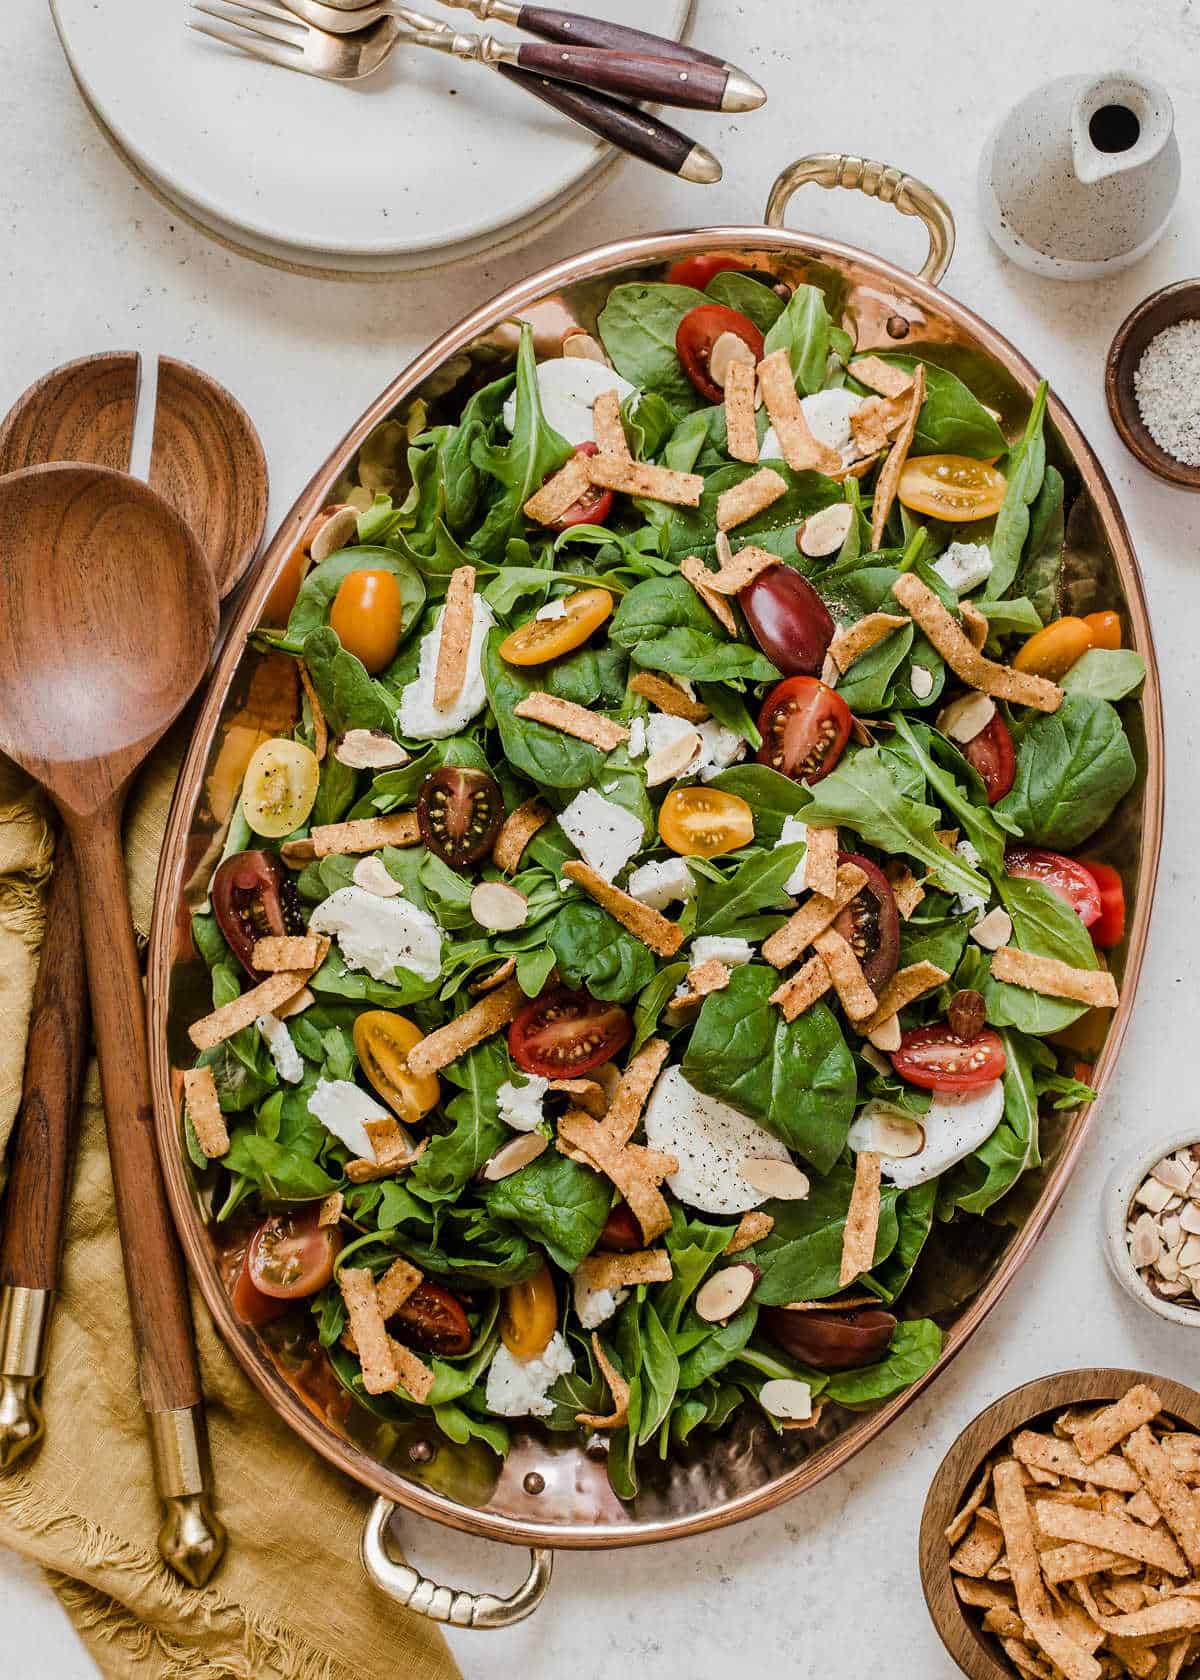 Spinach and Arugula Salad with Tomatoes & Goat Cheese